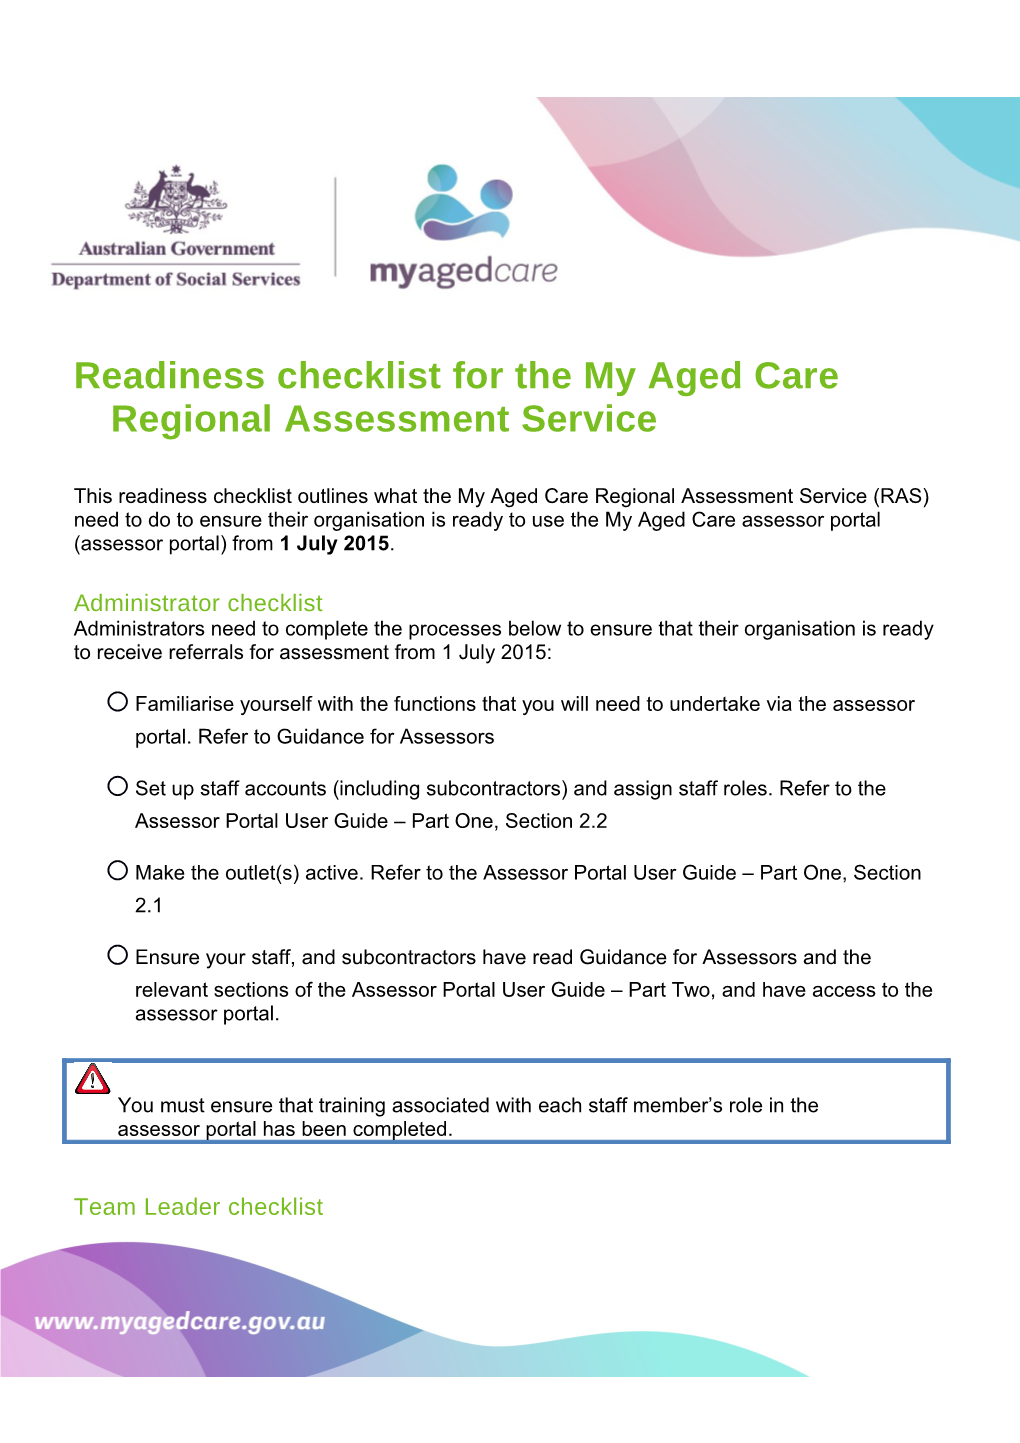 Readiness Checklist for the My Aged Care Regional Assessment Service